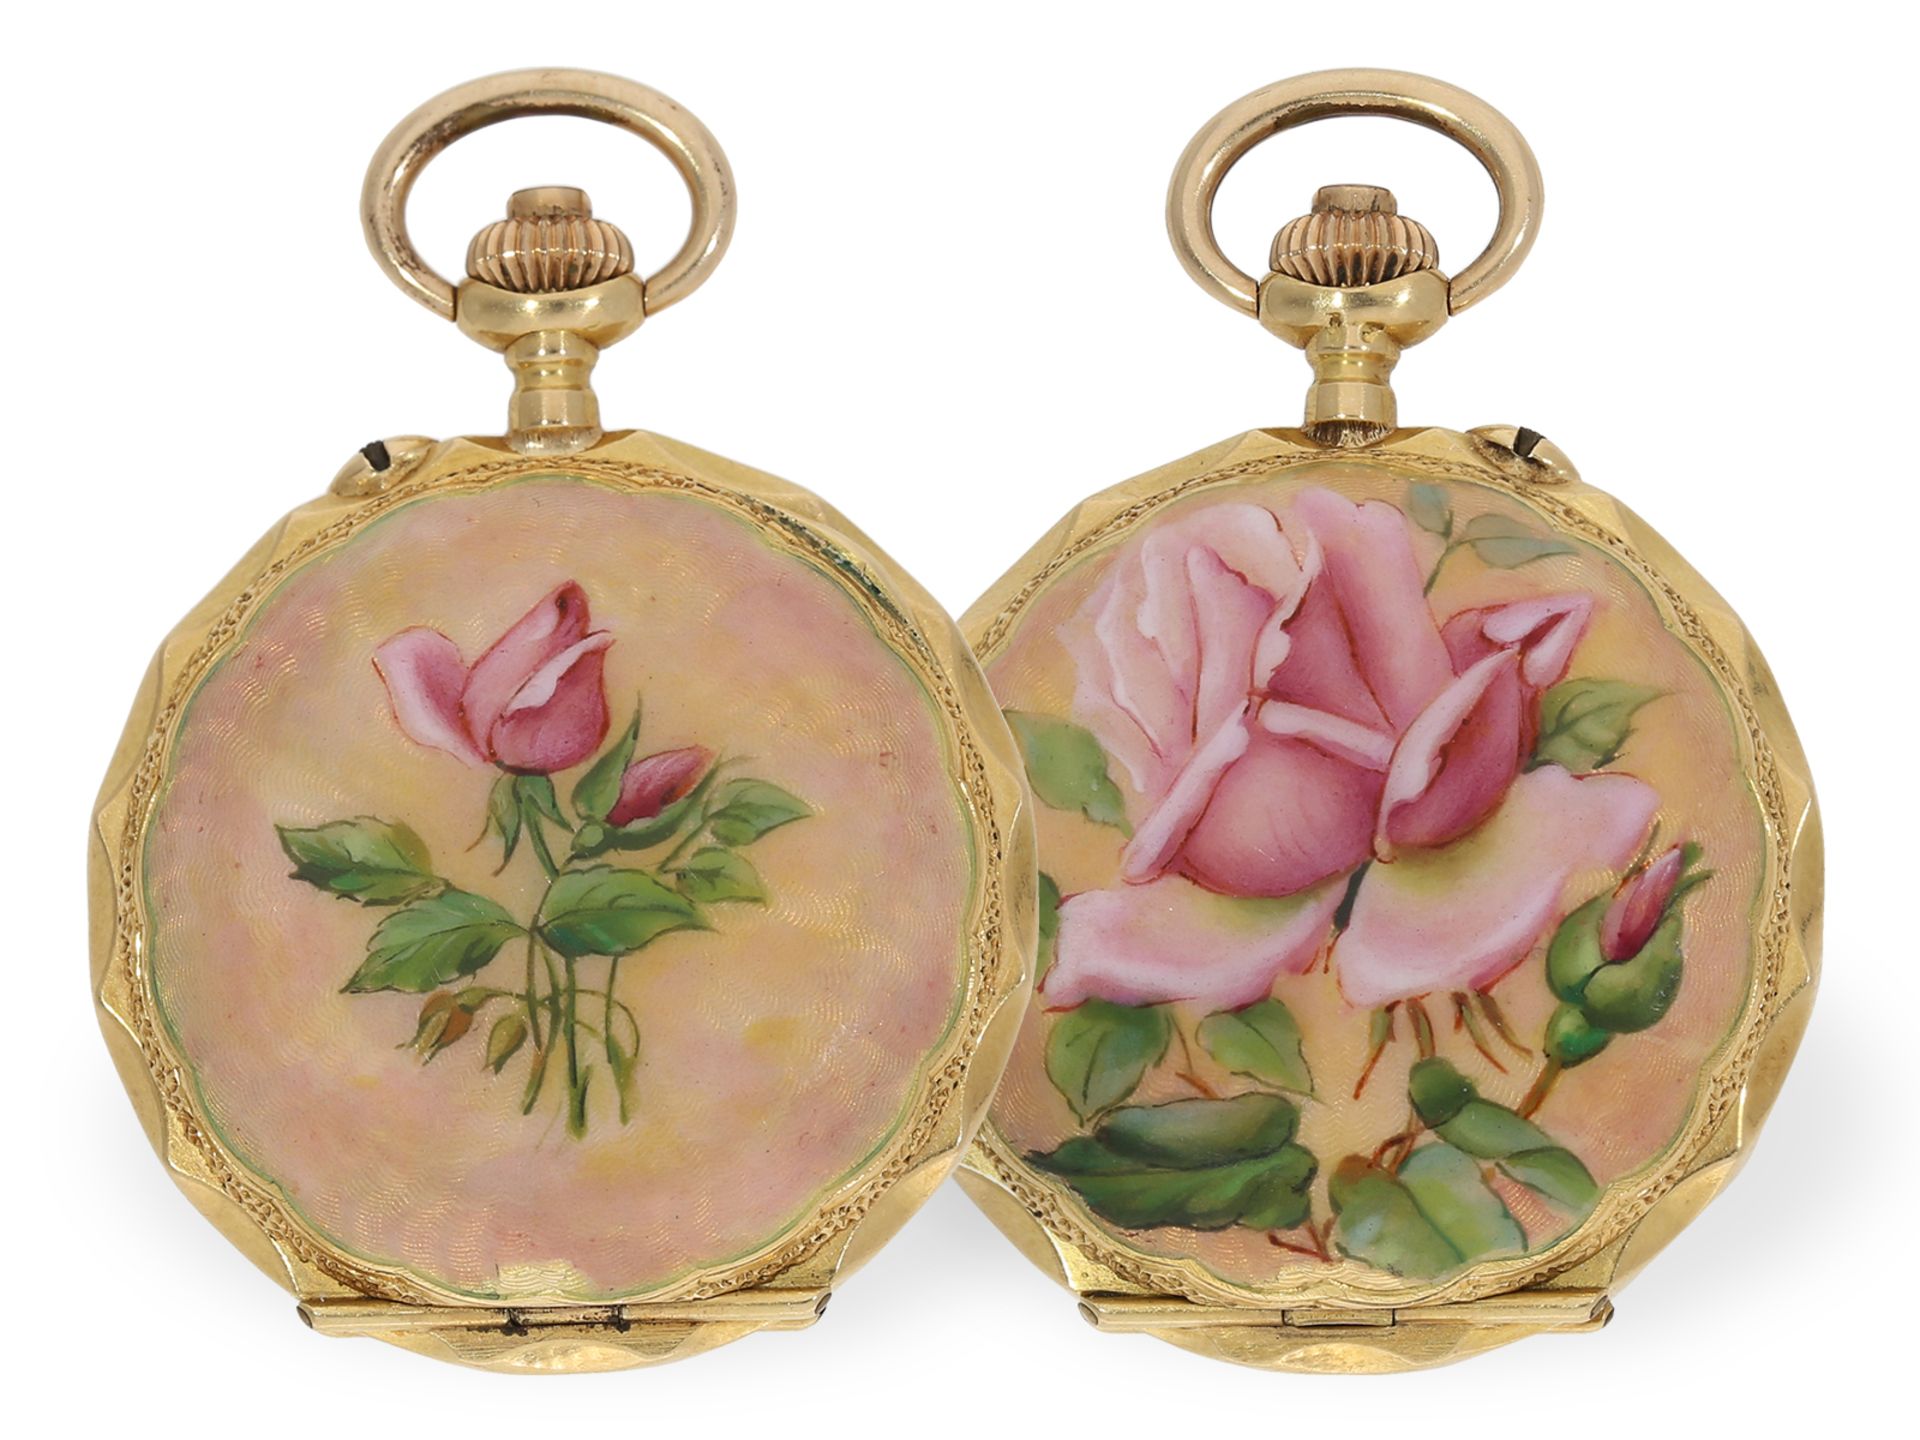 Pocket watch: extremely fine gold/enamel ladies' watch for the Chinese market, ca. 1900